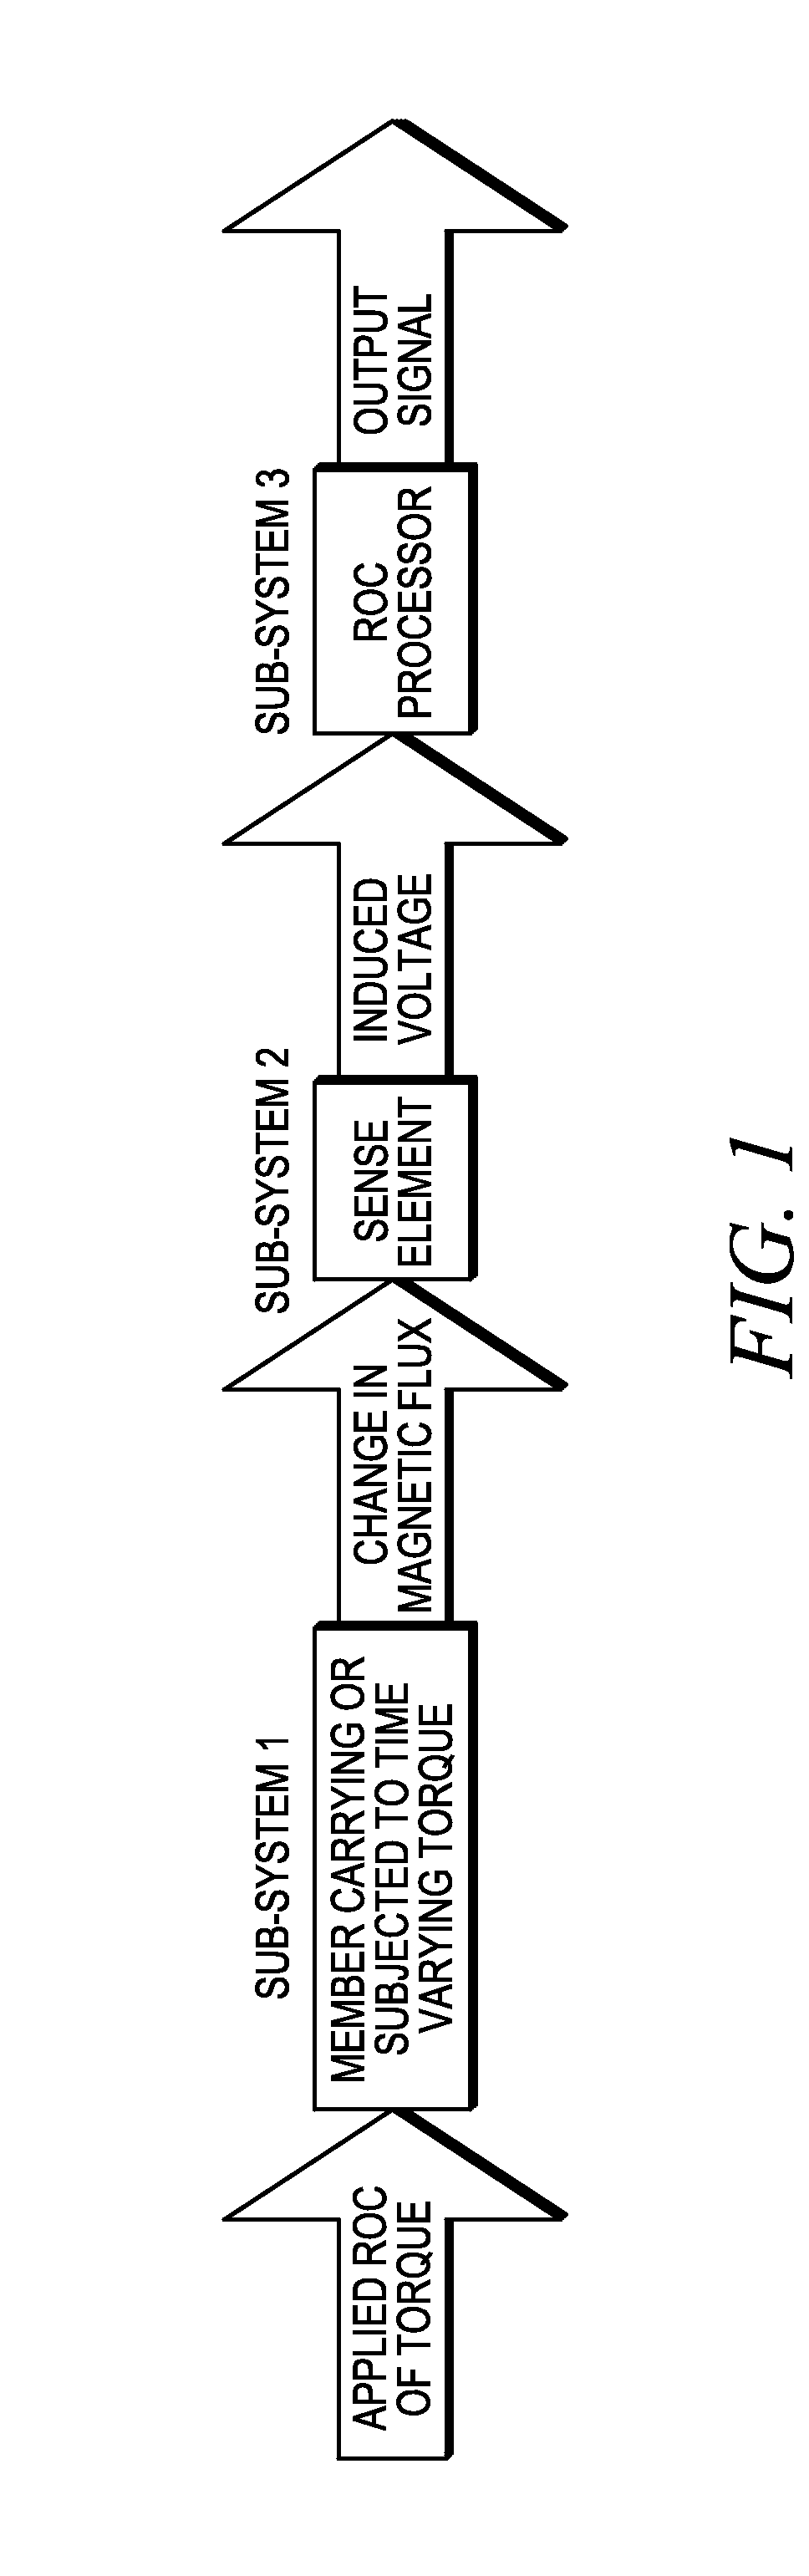 Devices and methods for detecting rates of change of torque